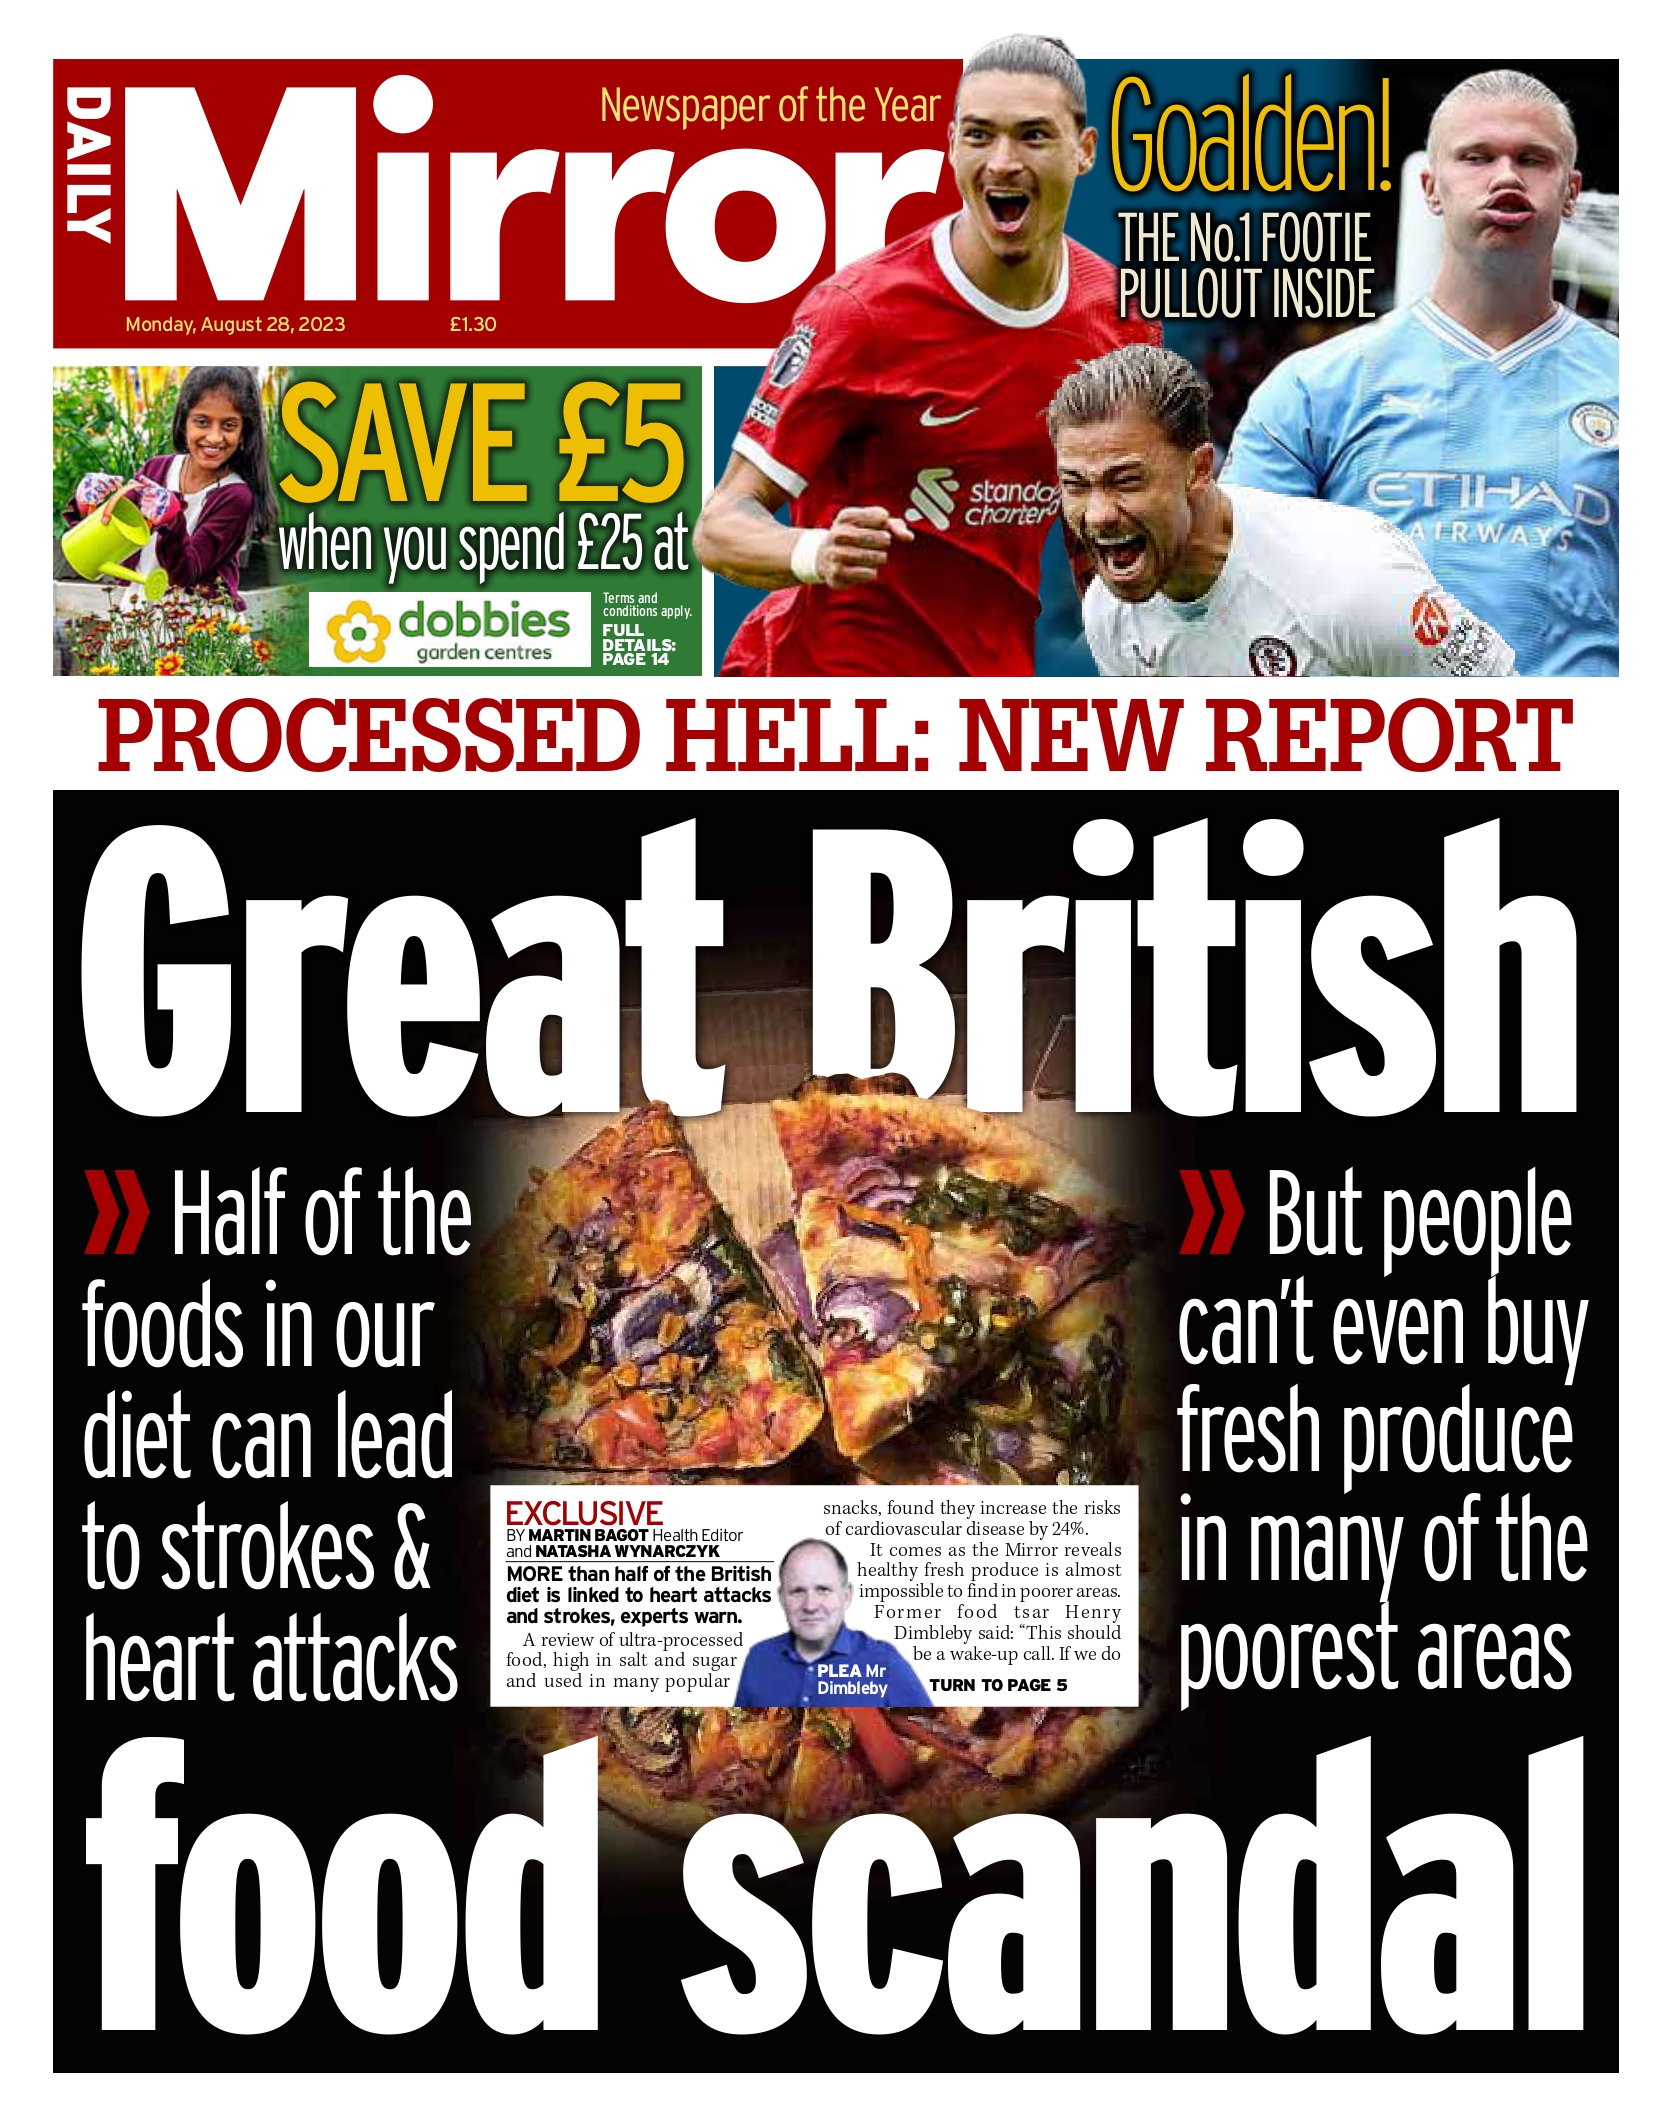 Monday's front page: Great British food scandal 